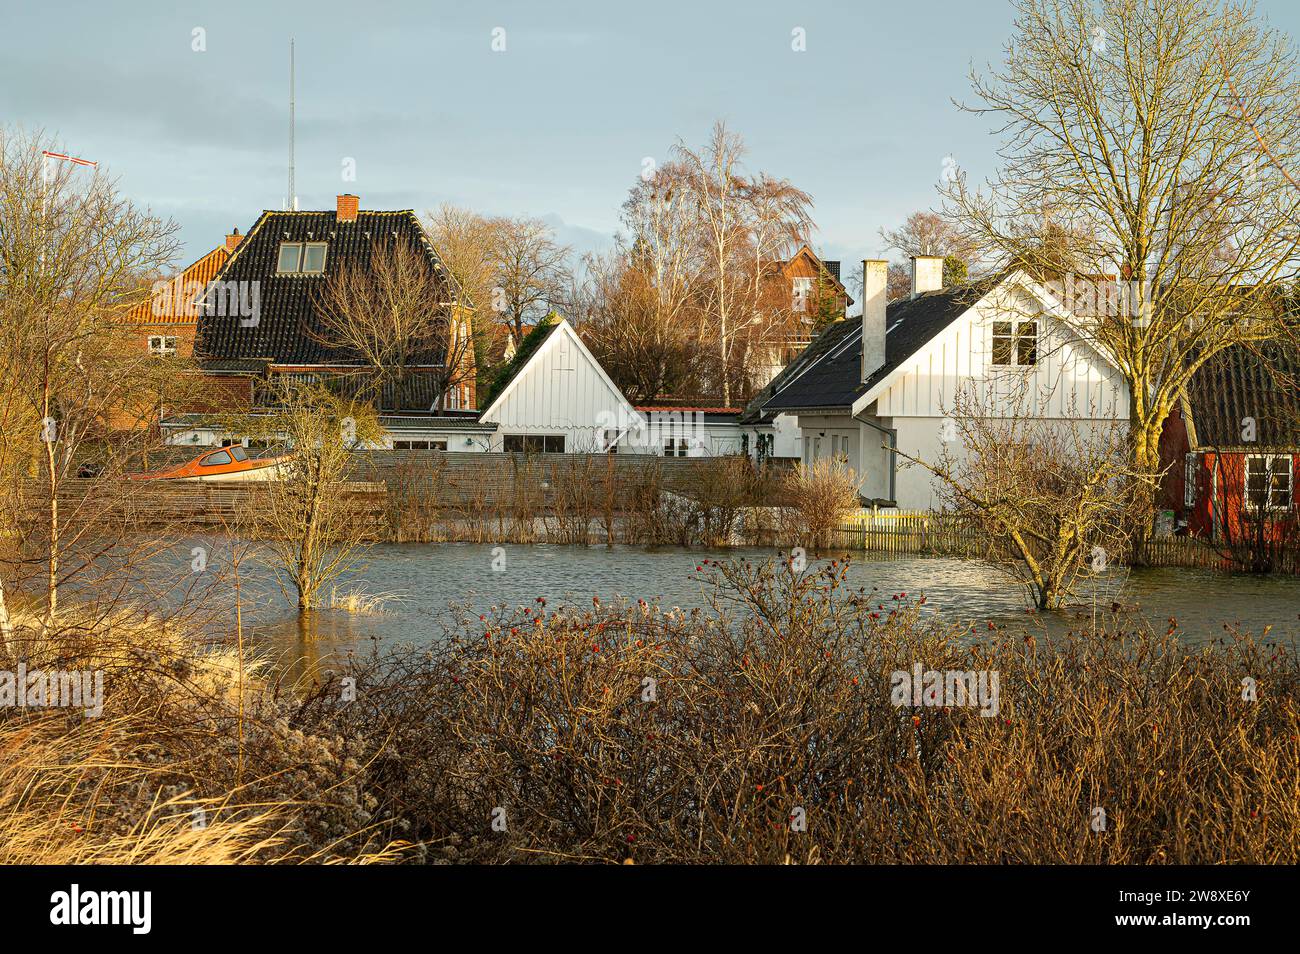 Denmark, Dec. 22. Flooding in Frederikssund when the water level is at its highest on Friday afternoon, (Credit Image: © Stig Alenäs) Stock Photo